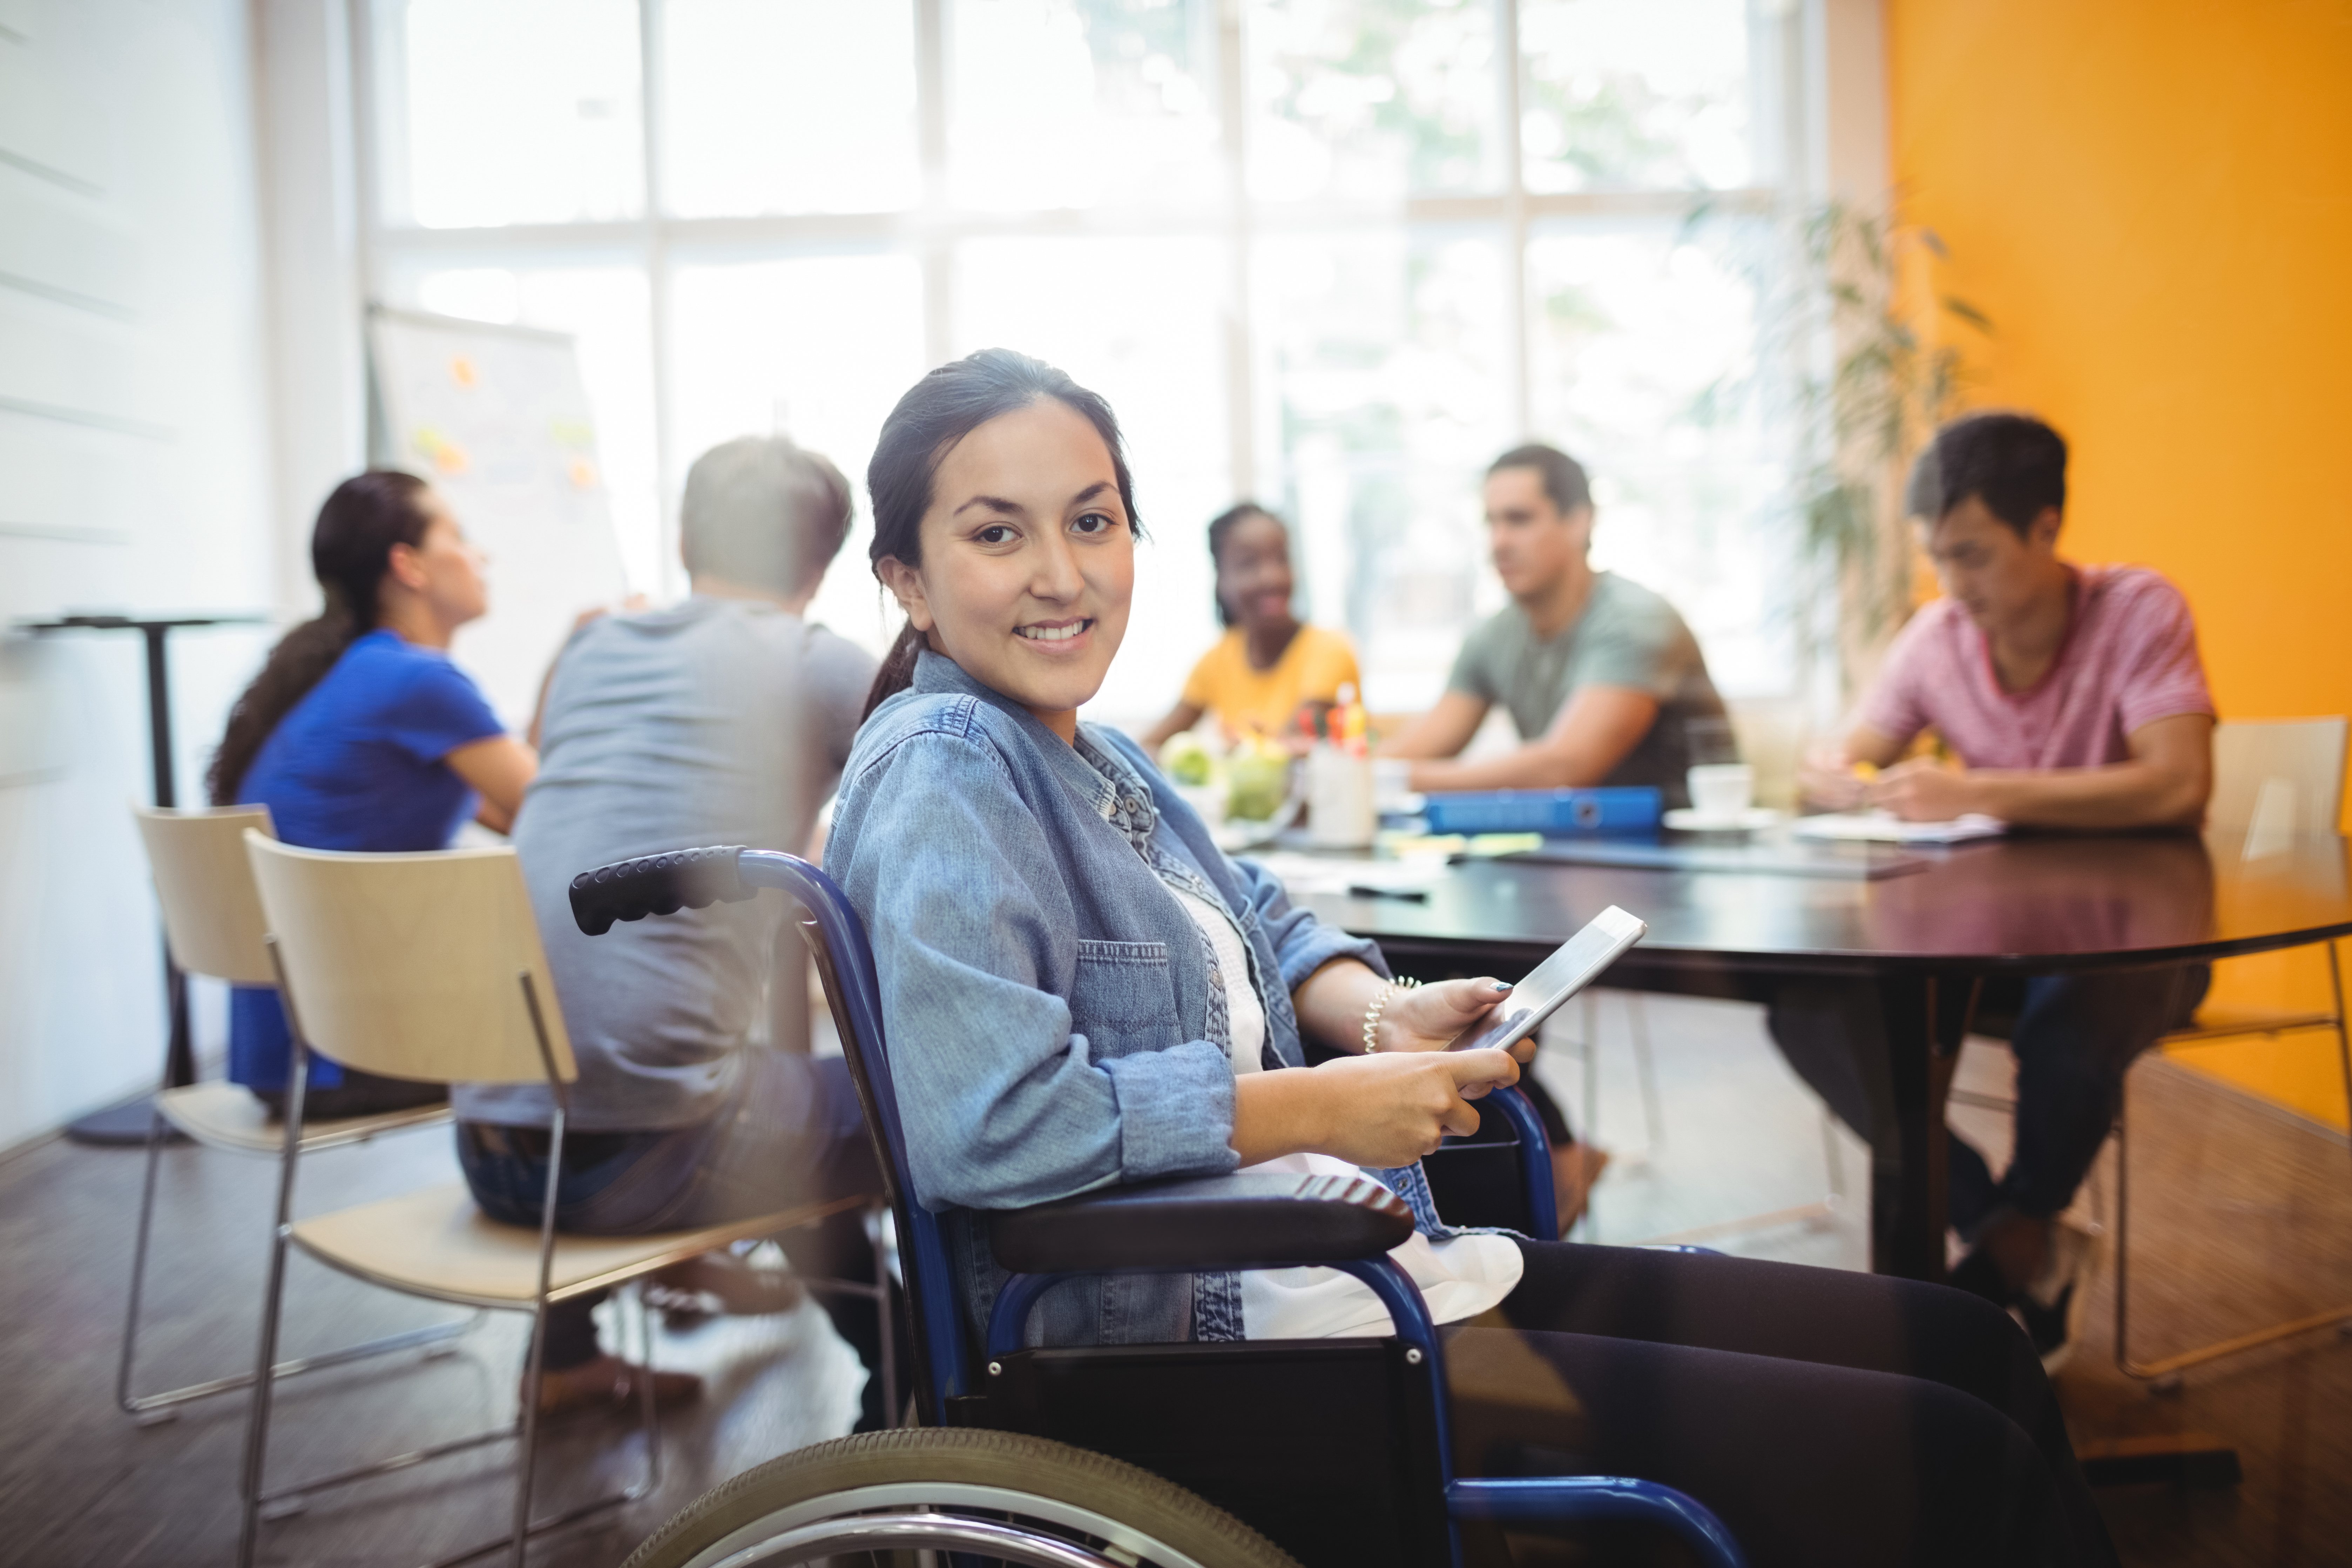 Accessibility in the Workforce: A Blind Person's Perspective